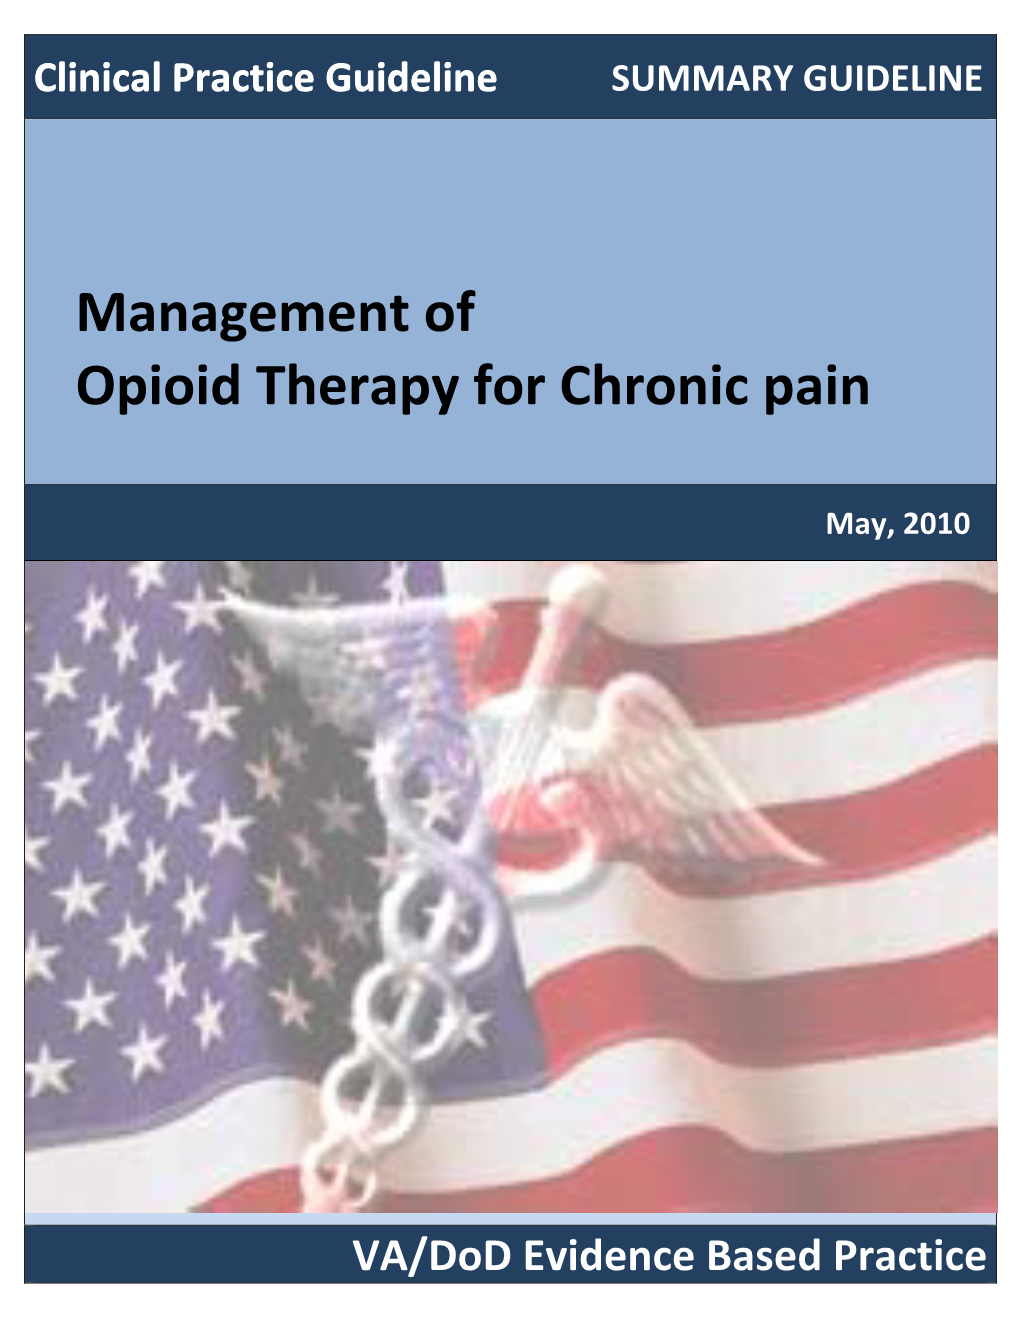 Management of Opioid Therapy for Chronic Pain BD)